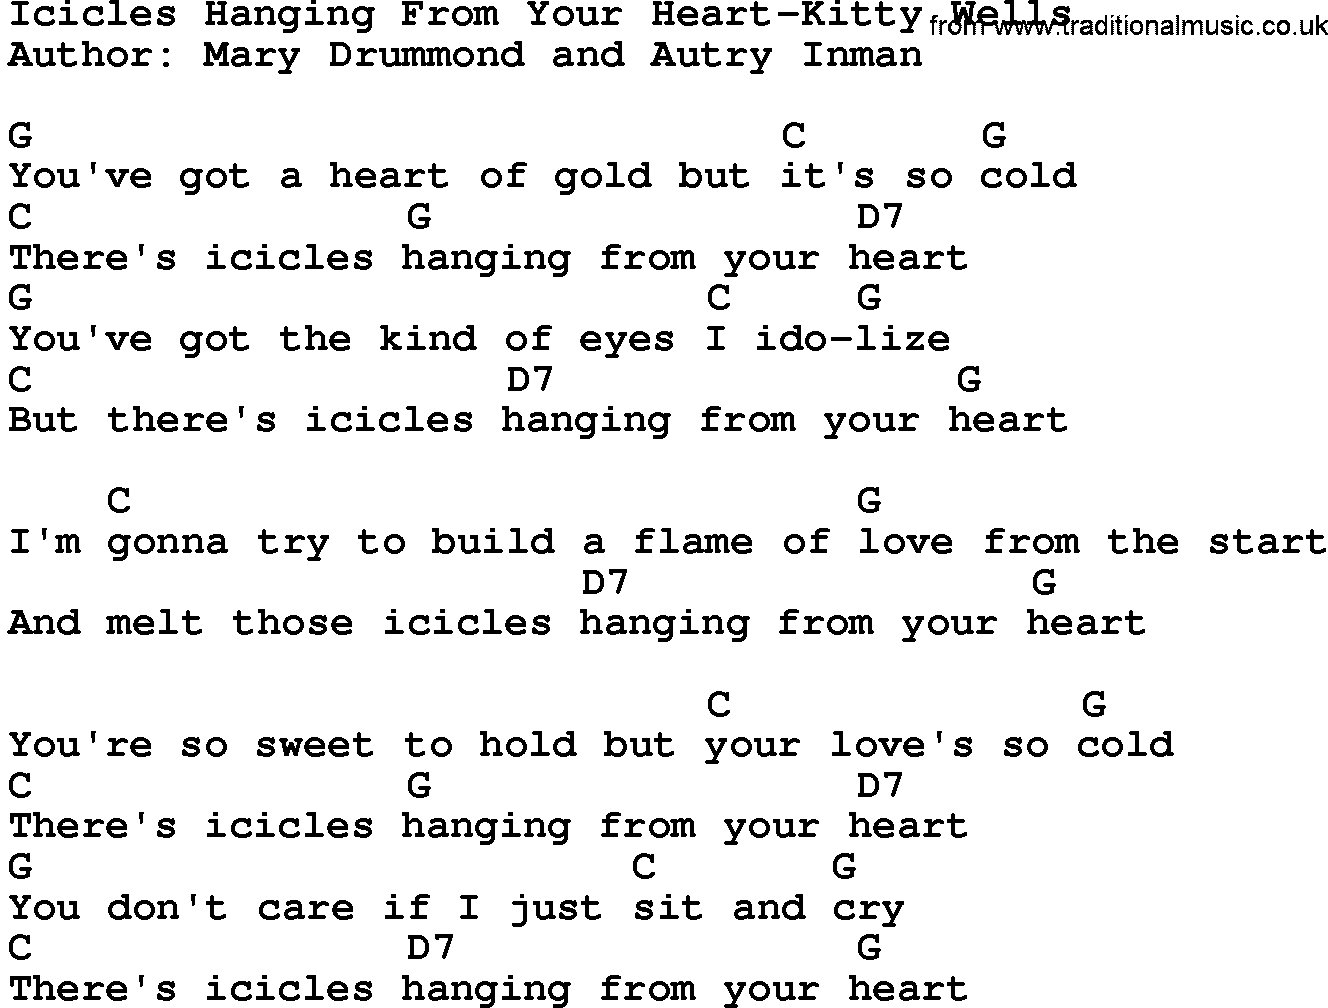 Country music song: Icicles Hanging From Your Heart-Kitty Wells lyrics and chords